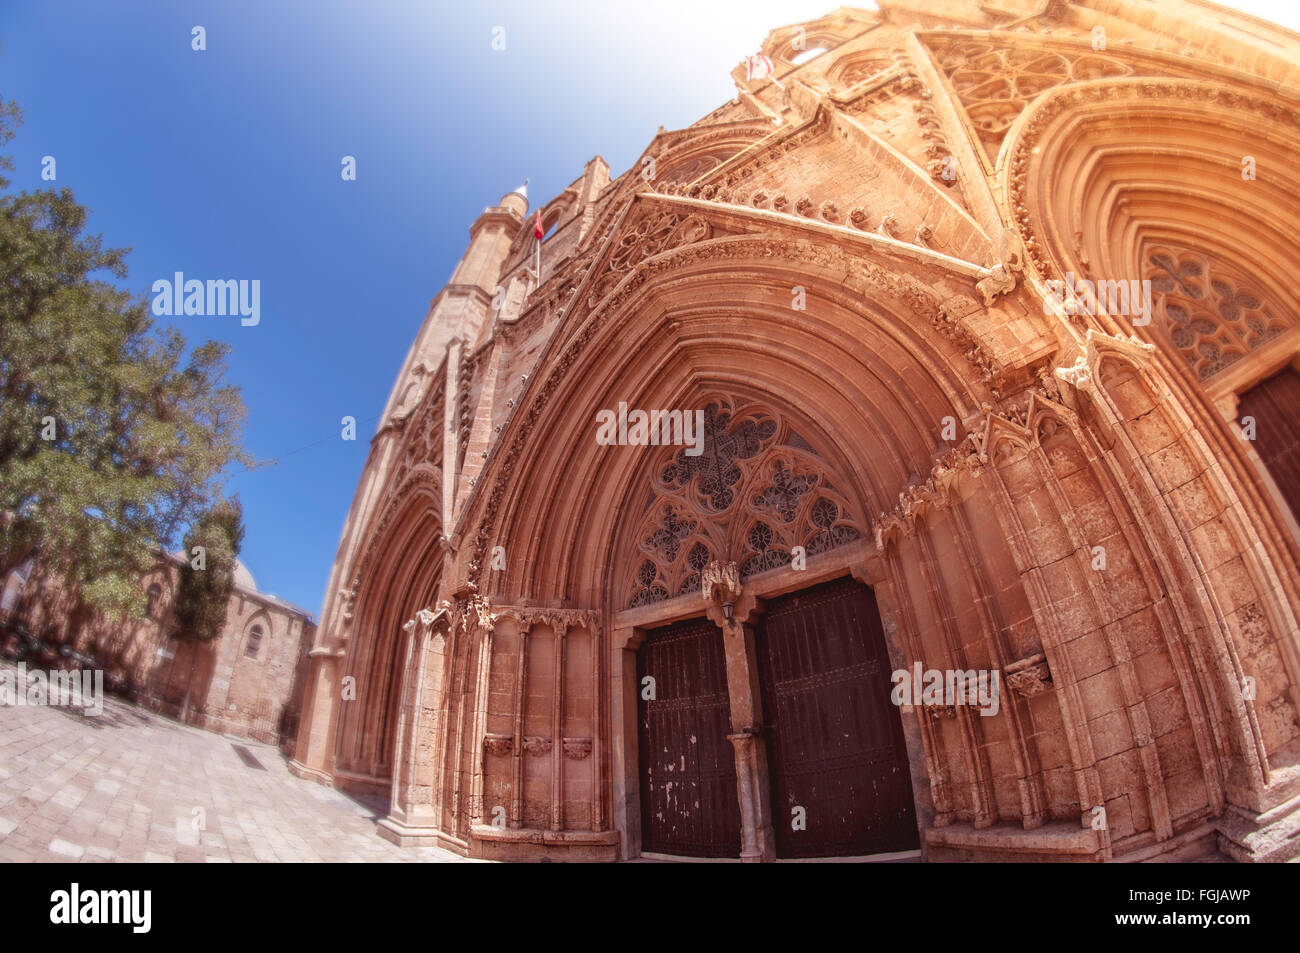 Facade of Lala Mustafa Pasha Mosque (formerly St. Nicholas Cathedral). Famagusta, Cyprus Stock Photo